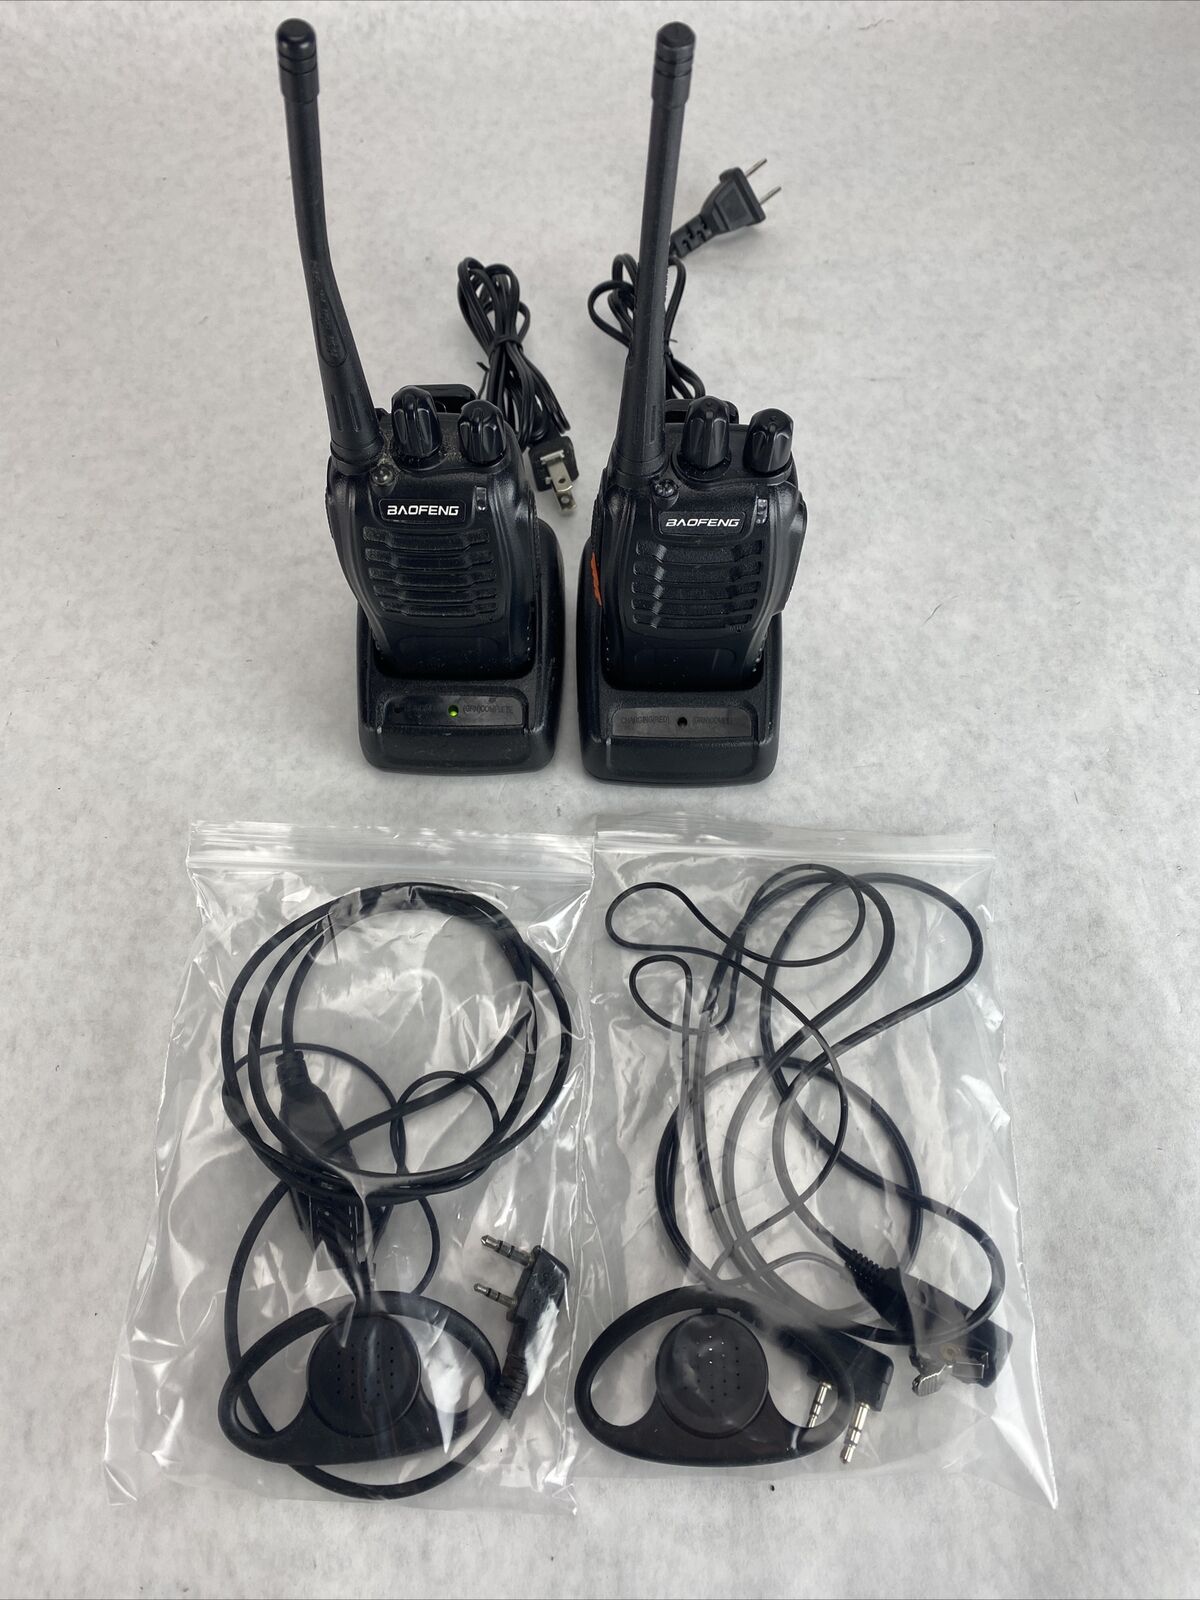 How to Connect Long Range Walkie Talkies with Other Devices